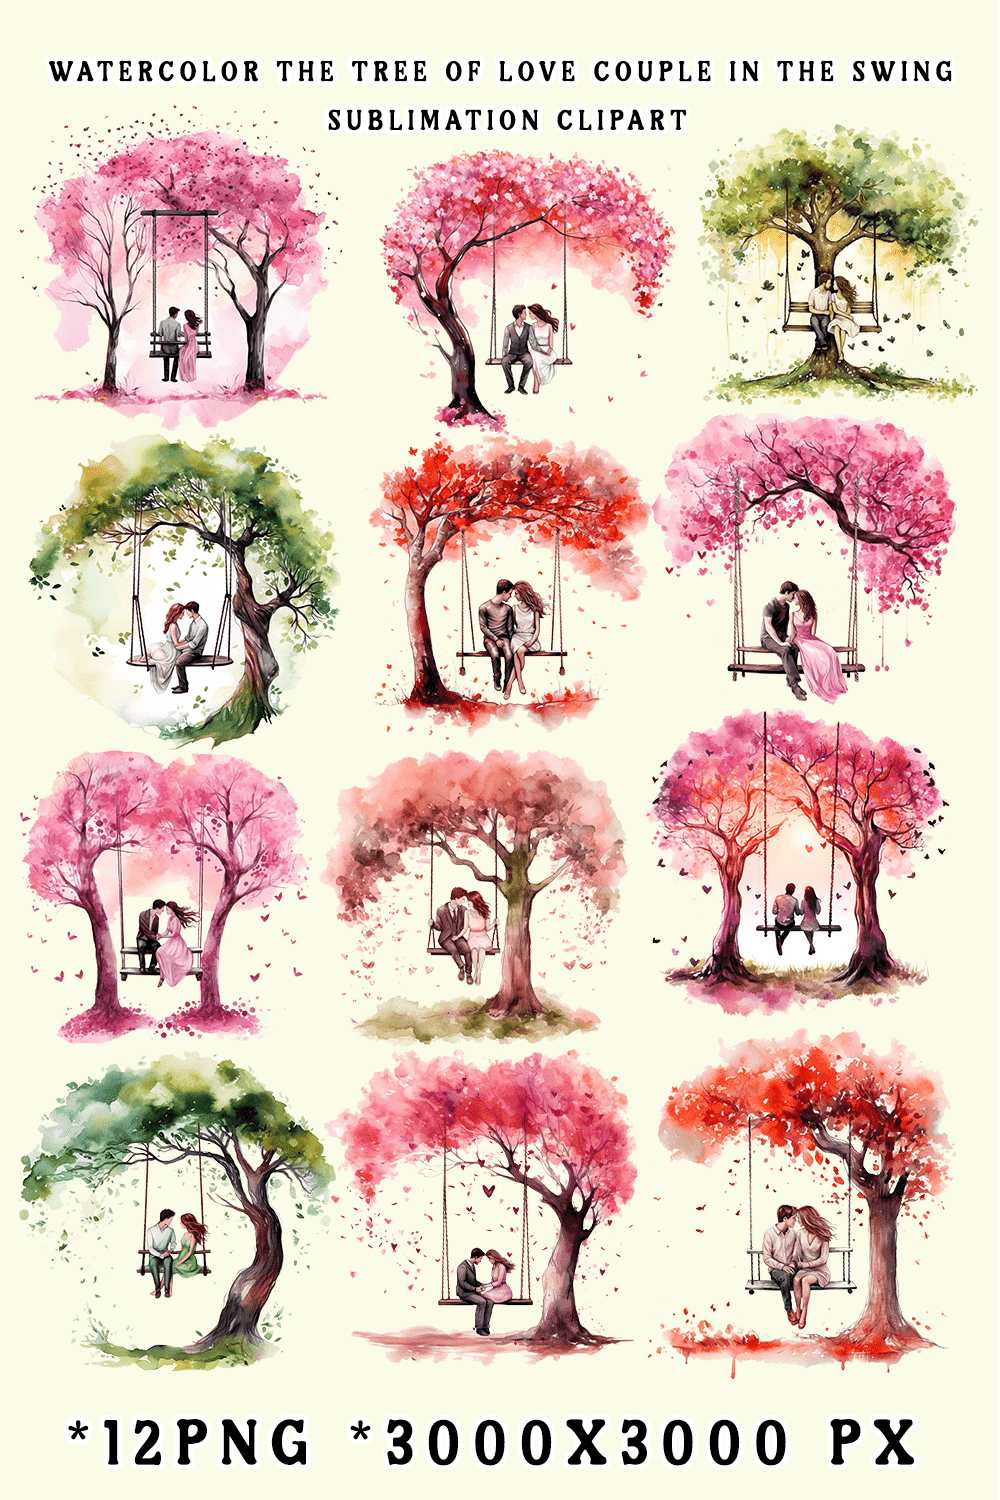 Watercolor The Tree of Love Couple in the Swing Sublimation Clipart pinterest preview image.